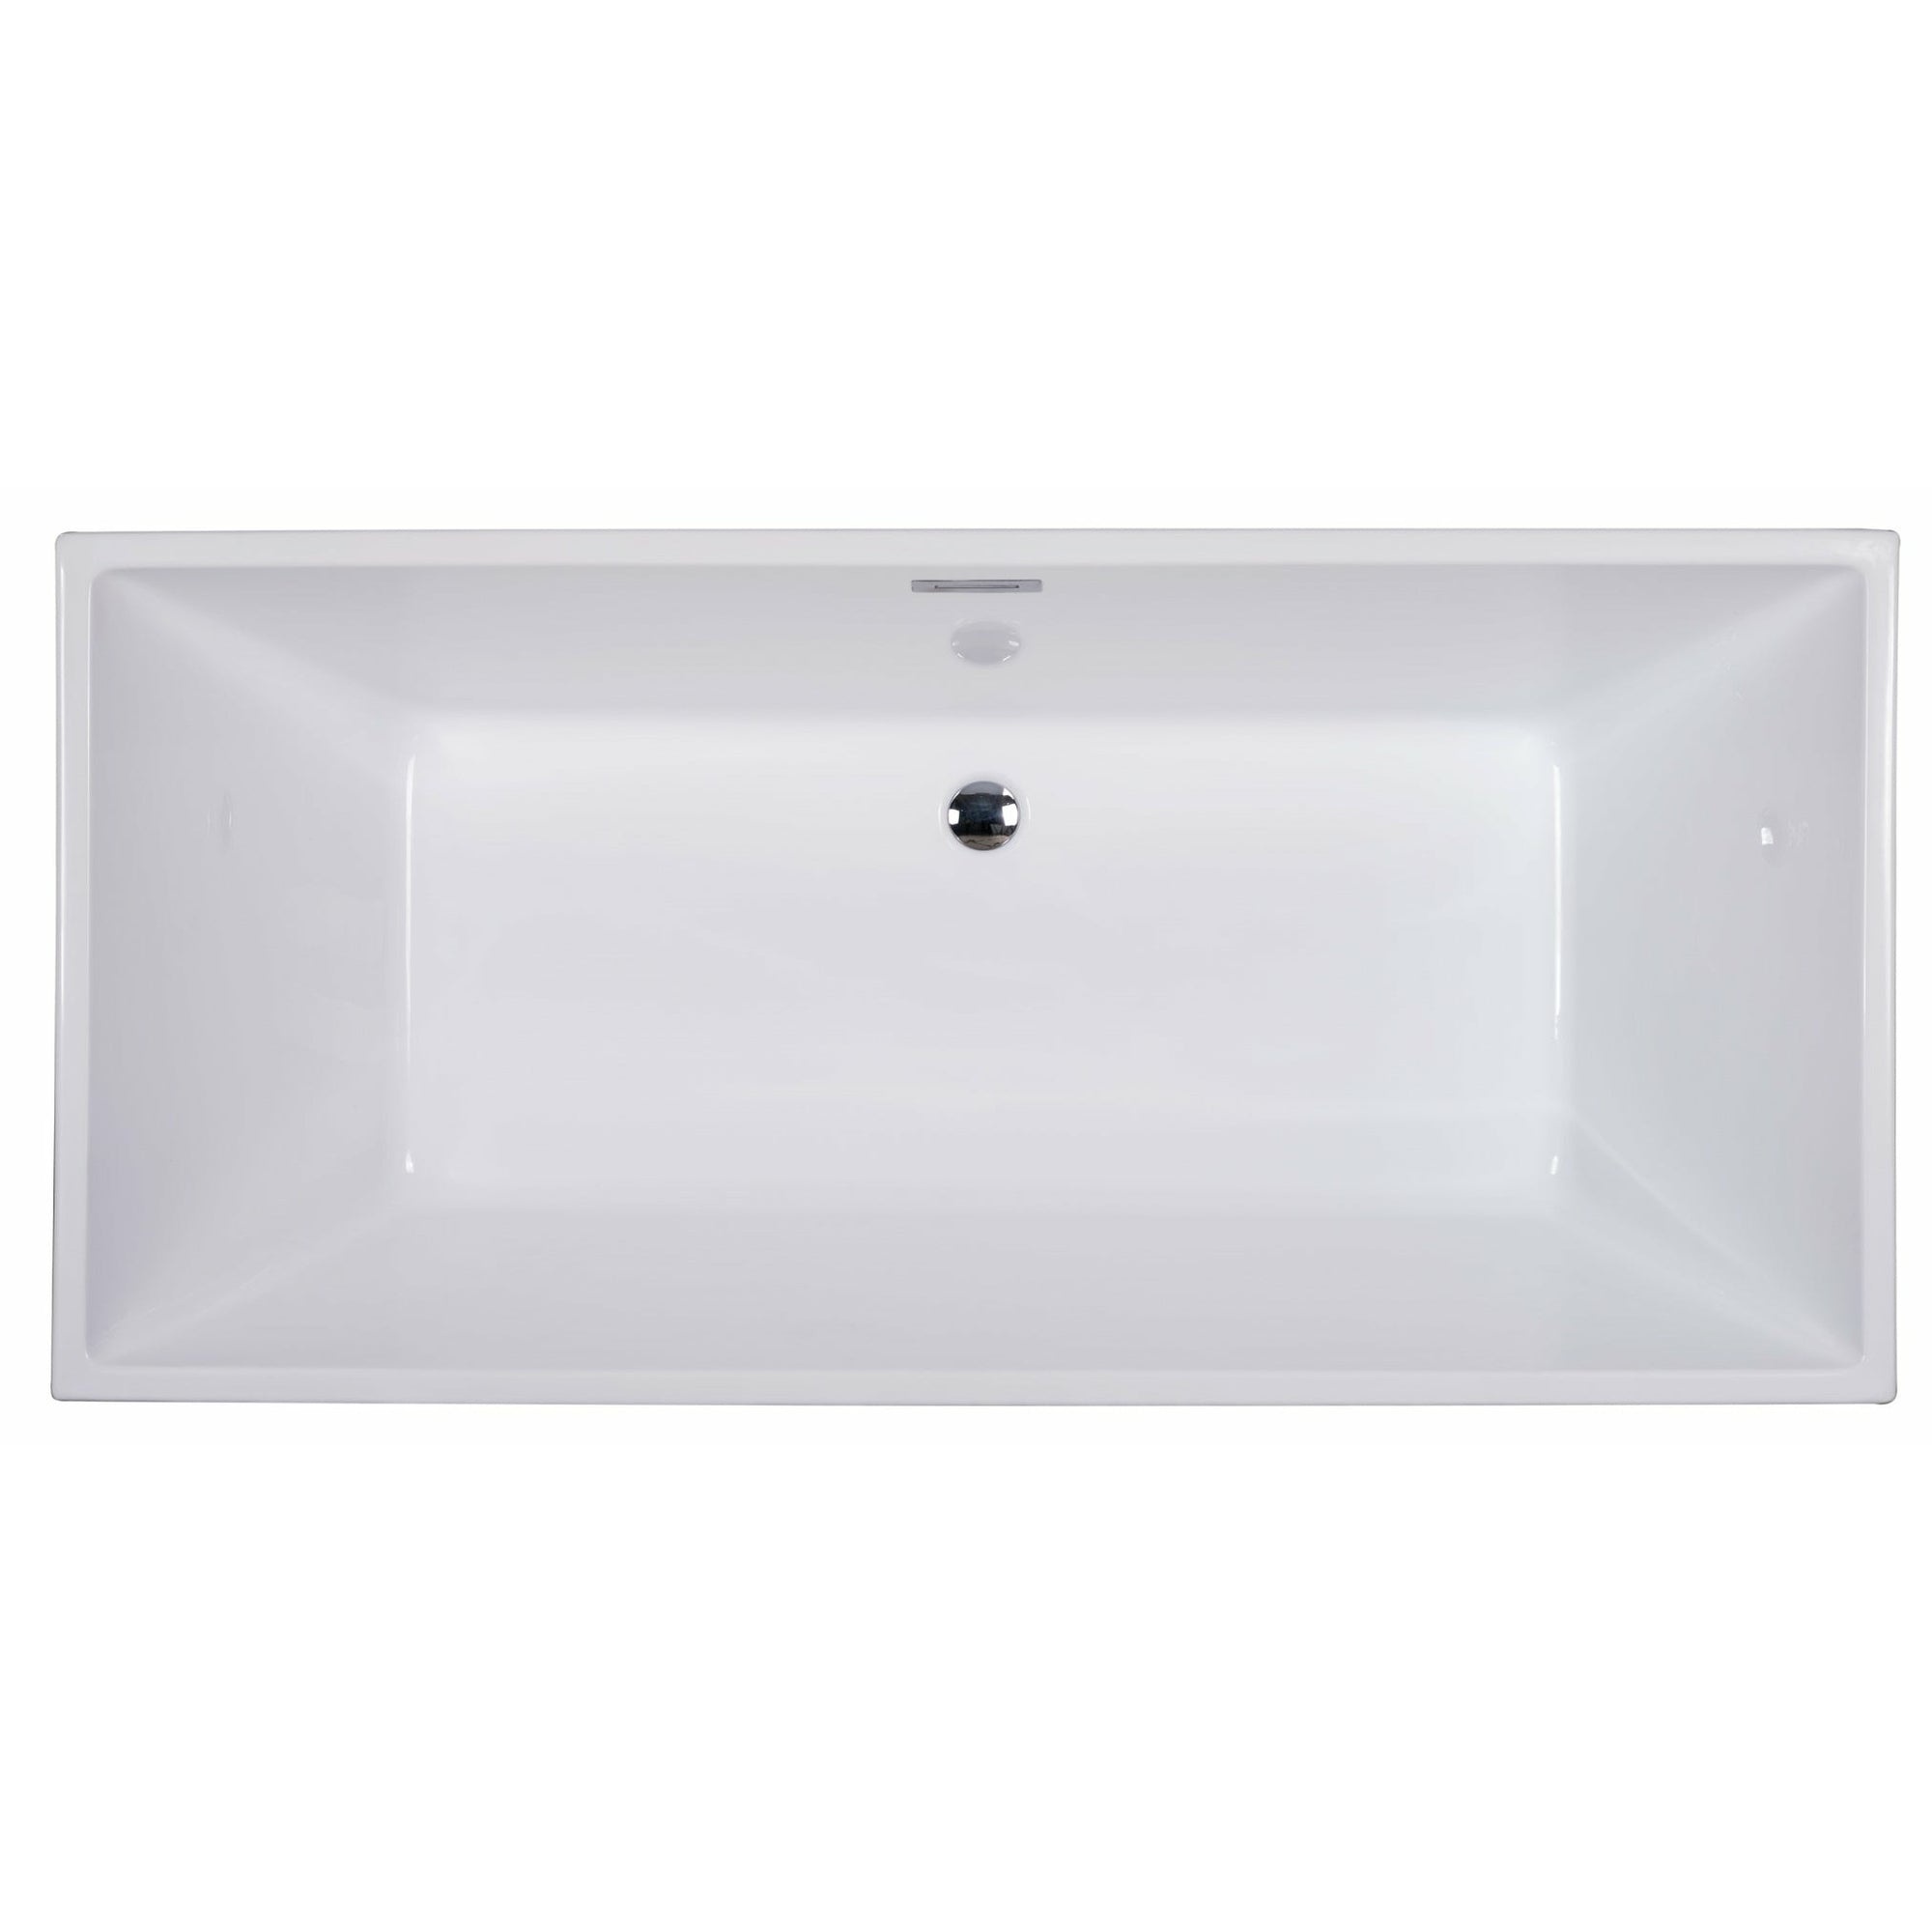 ALFI AB8832 67 inch White Rectangular Acrylic Free Standing Soaking Bathtub with polished chrome overflow, 1 person capacity in a white background